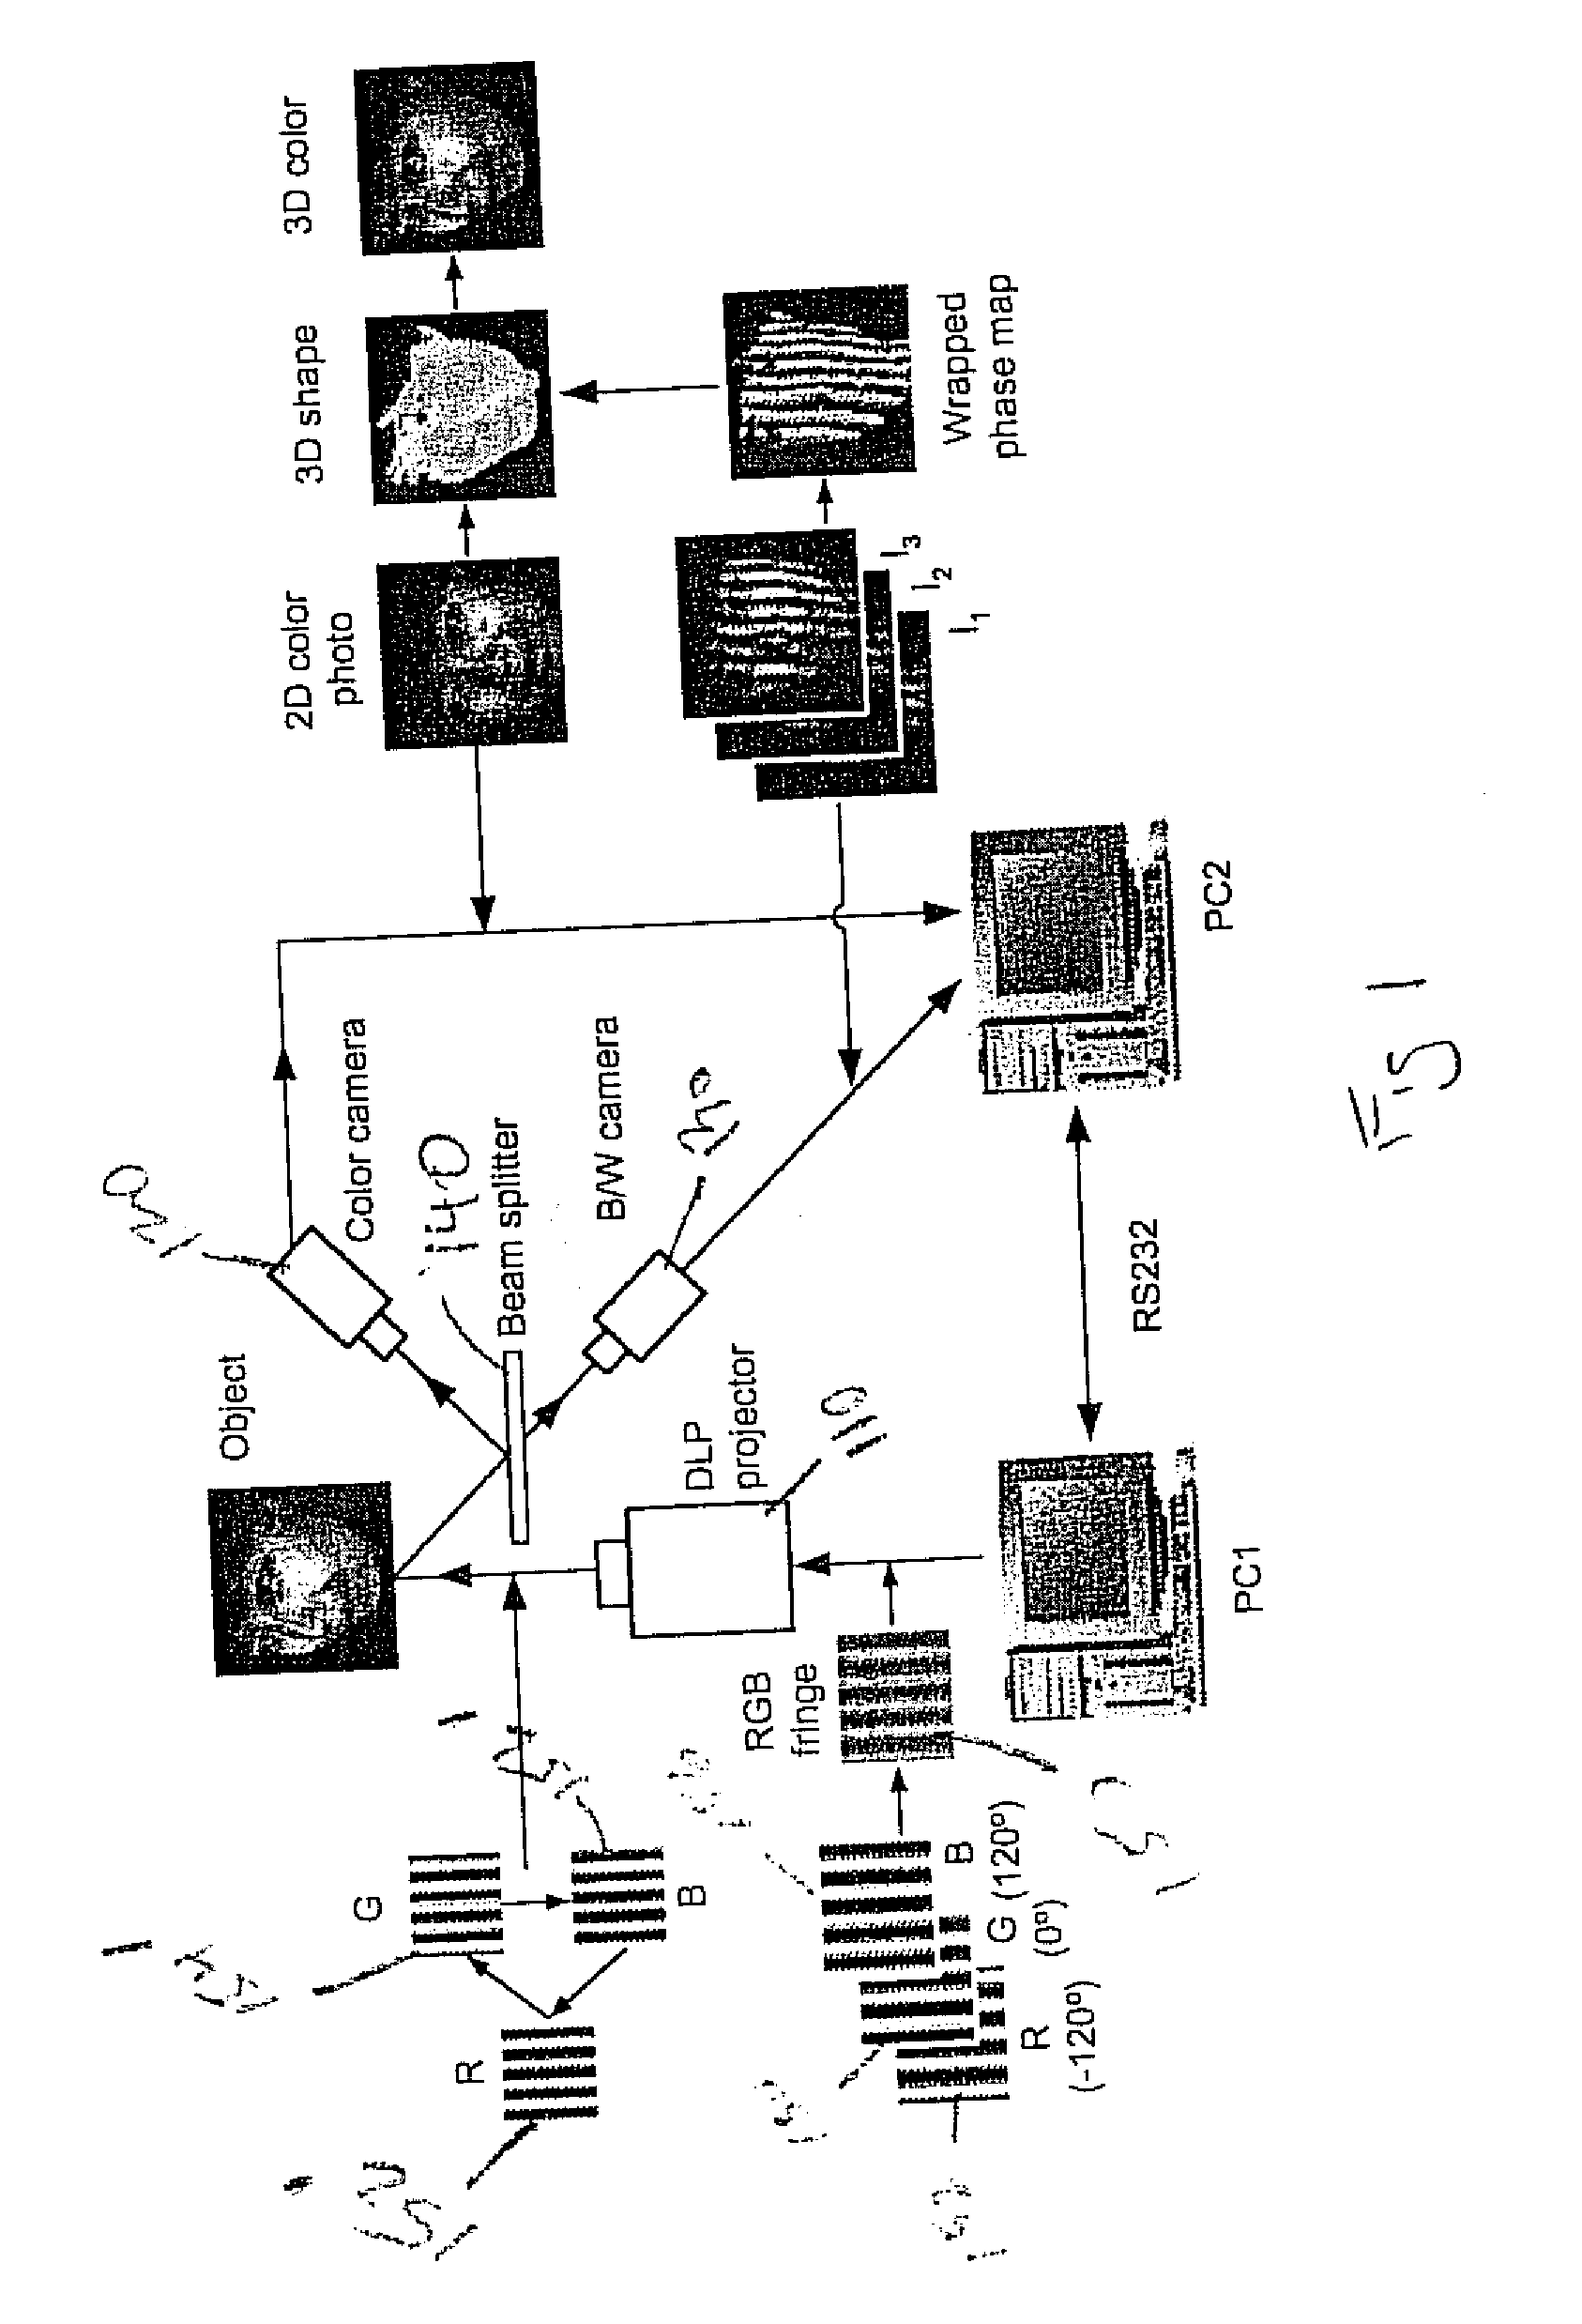 3D shape measurement system and method including fast three-step phase shifting, error compensation and calibration